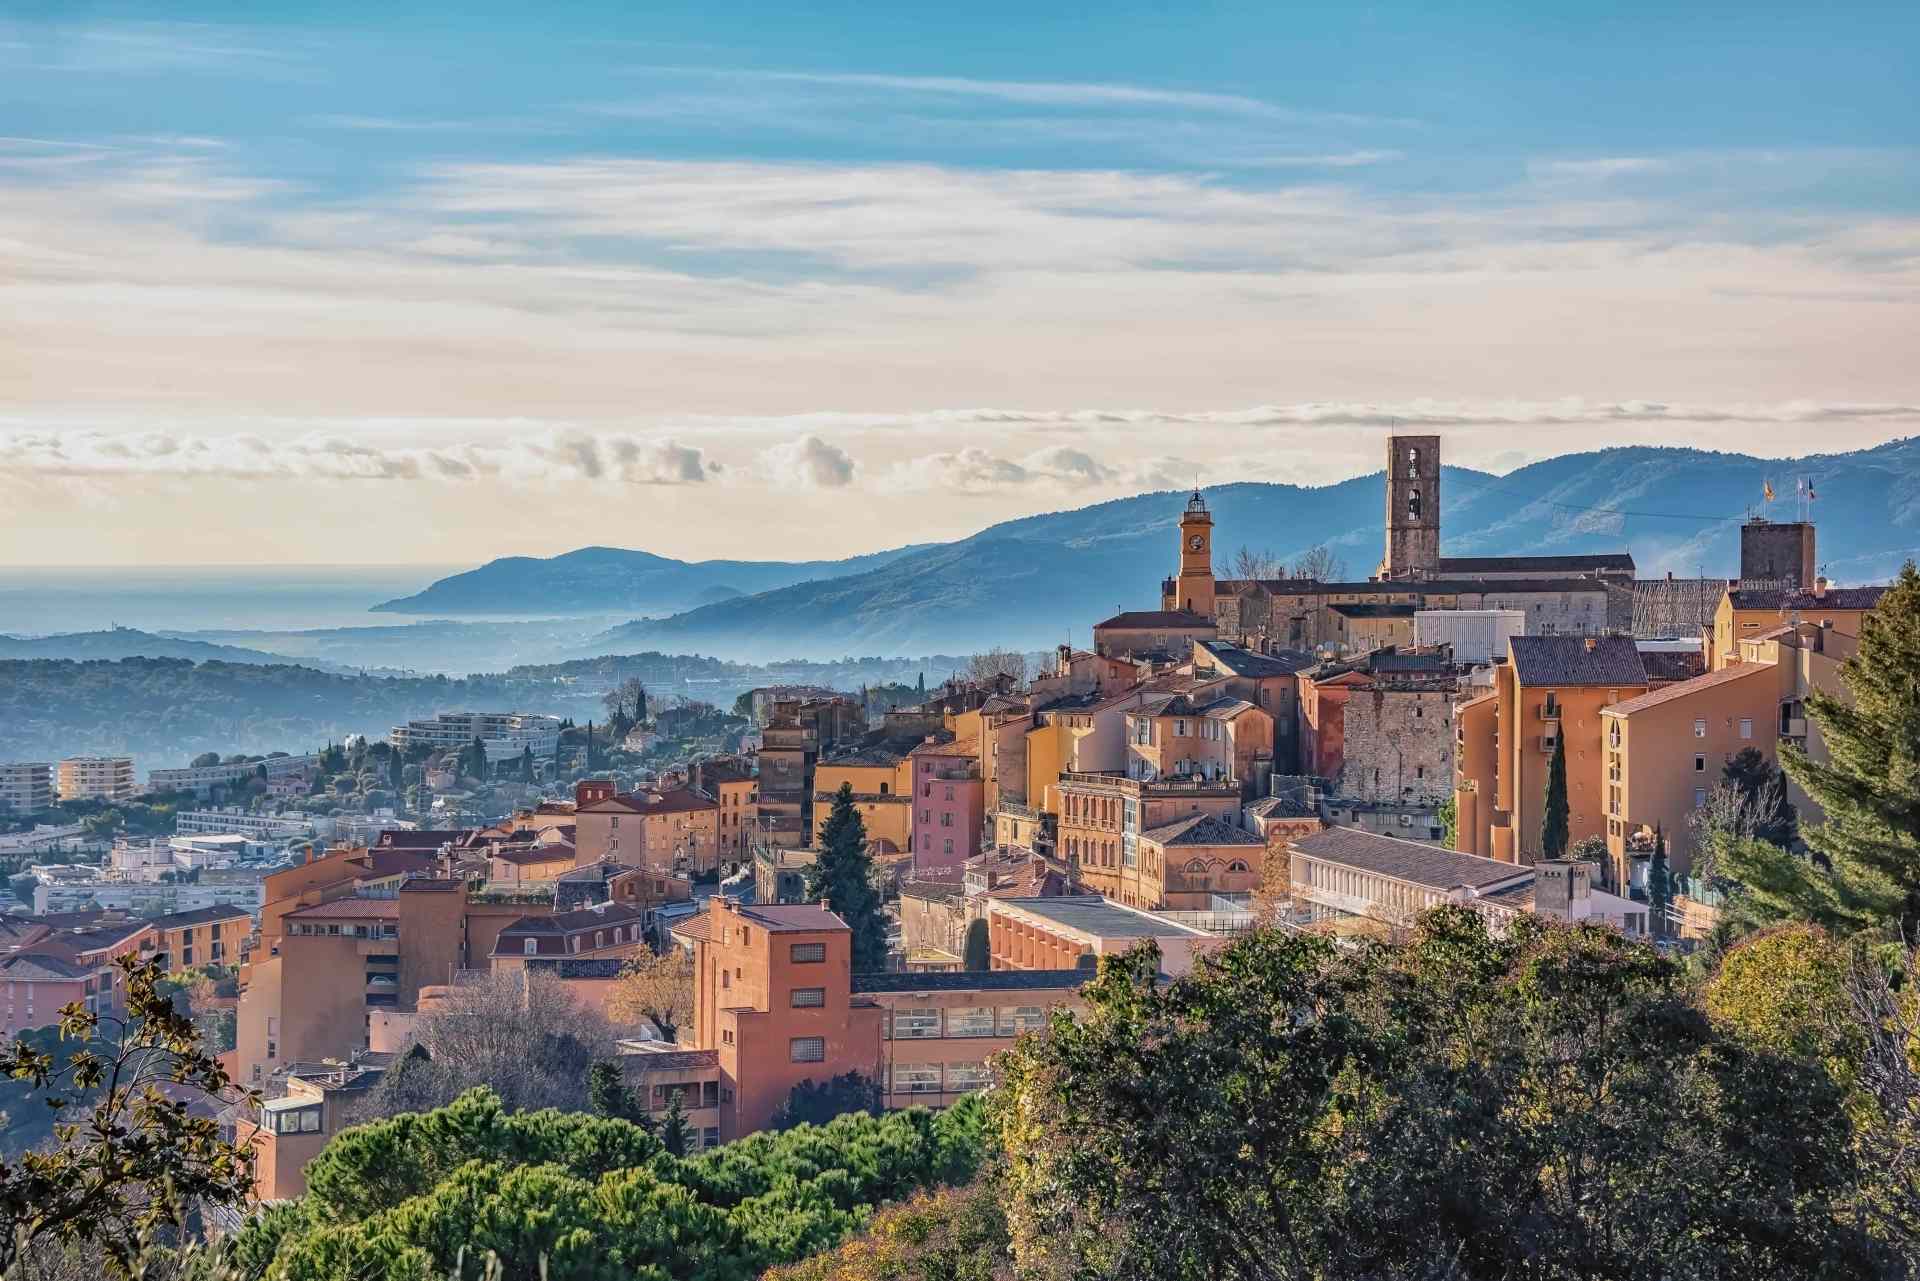 The city of Grasse on the French Riviera Photo Credit - Stockbym/Shutterstock